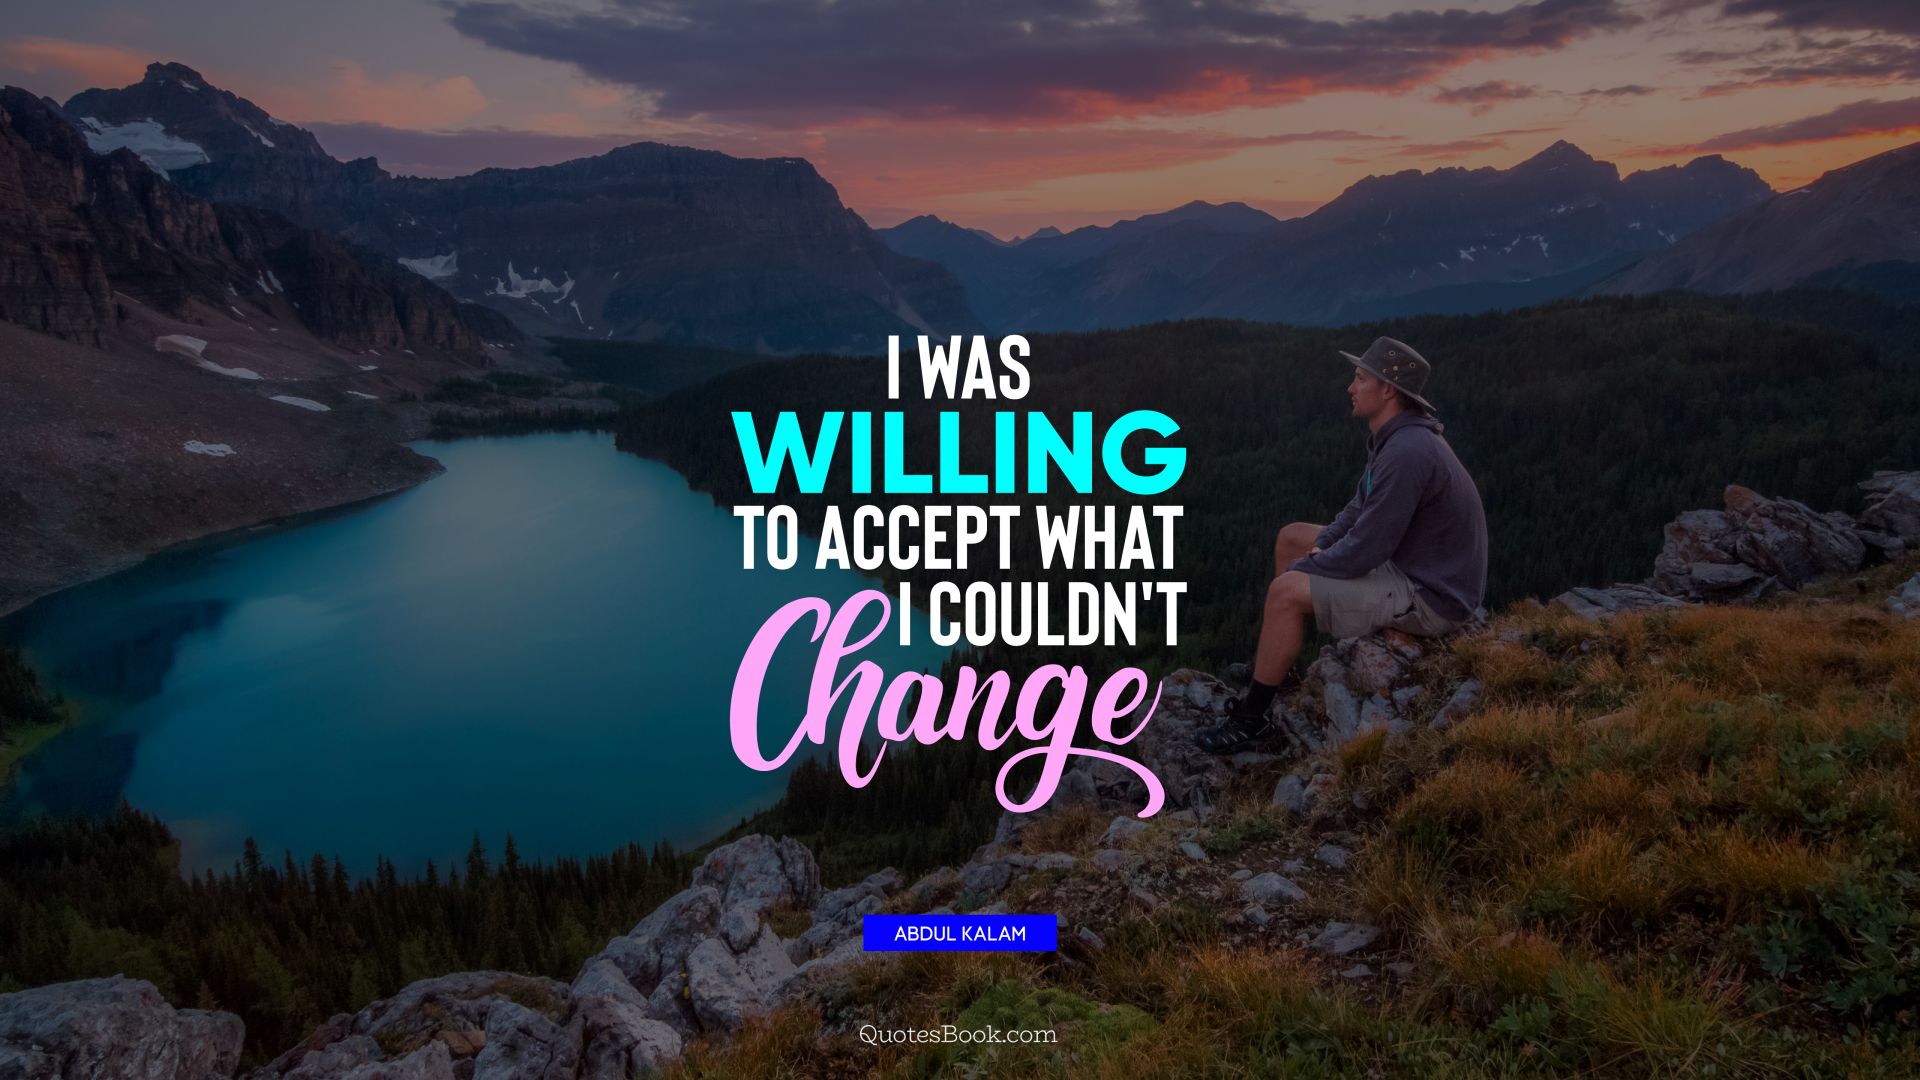 I was willing to accept what I couldn't change. - Quote by Abdul Kalam